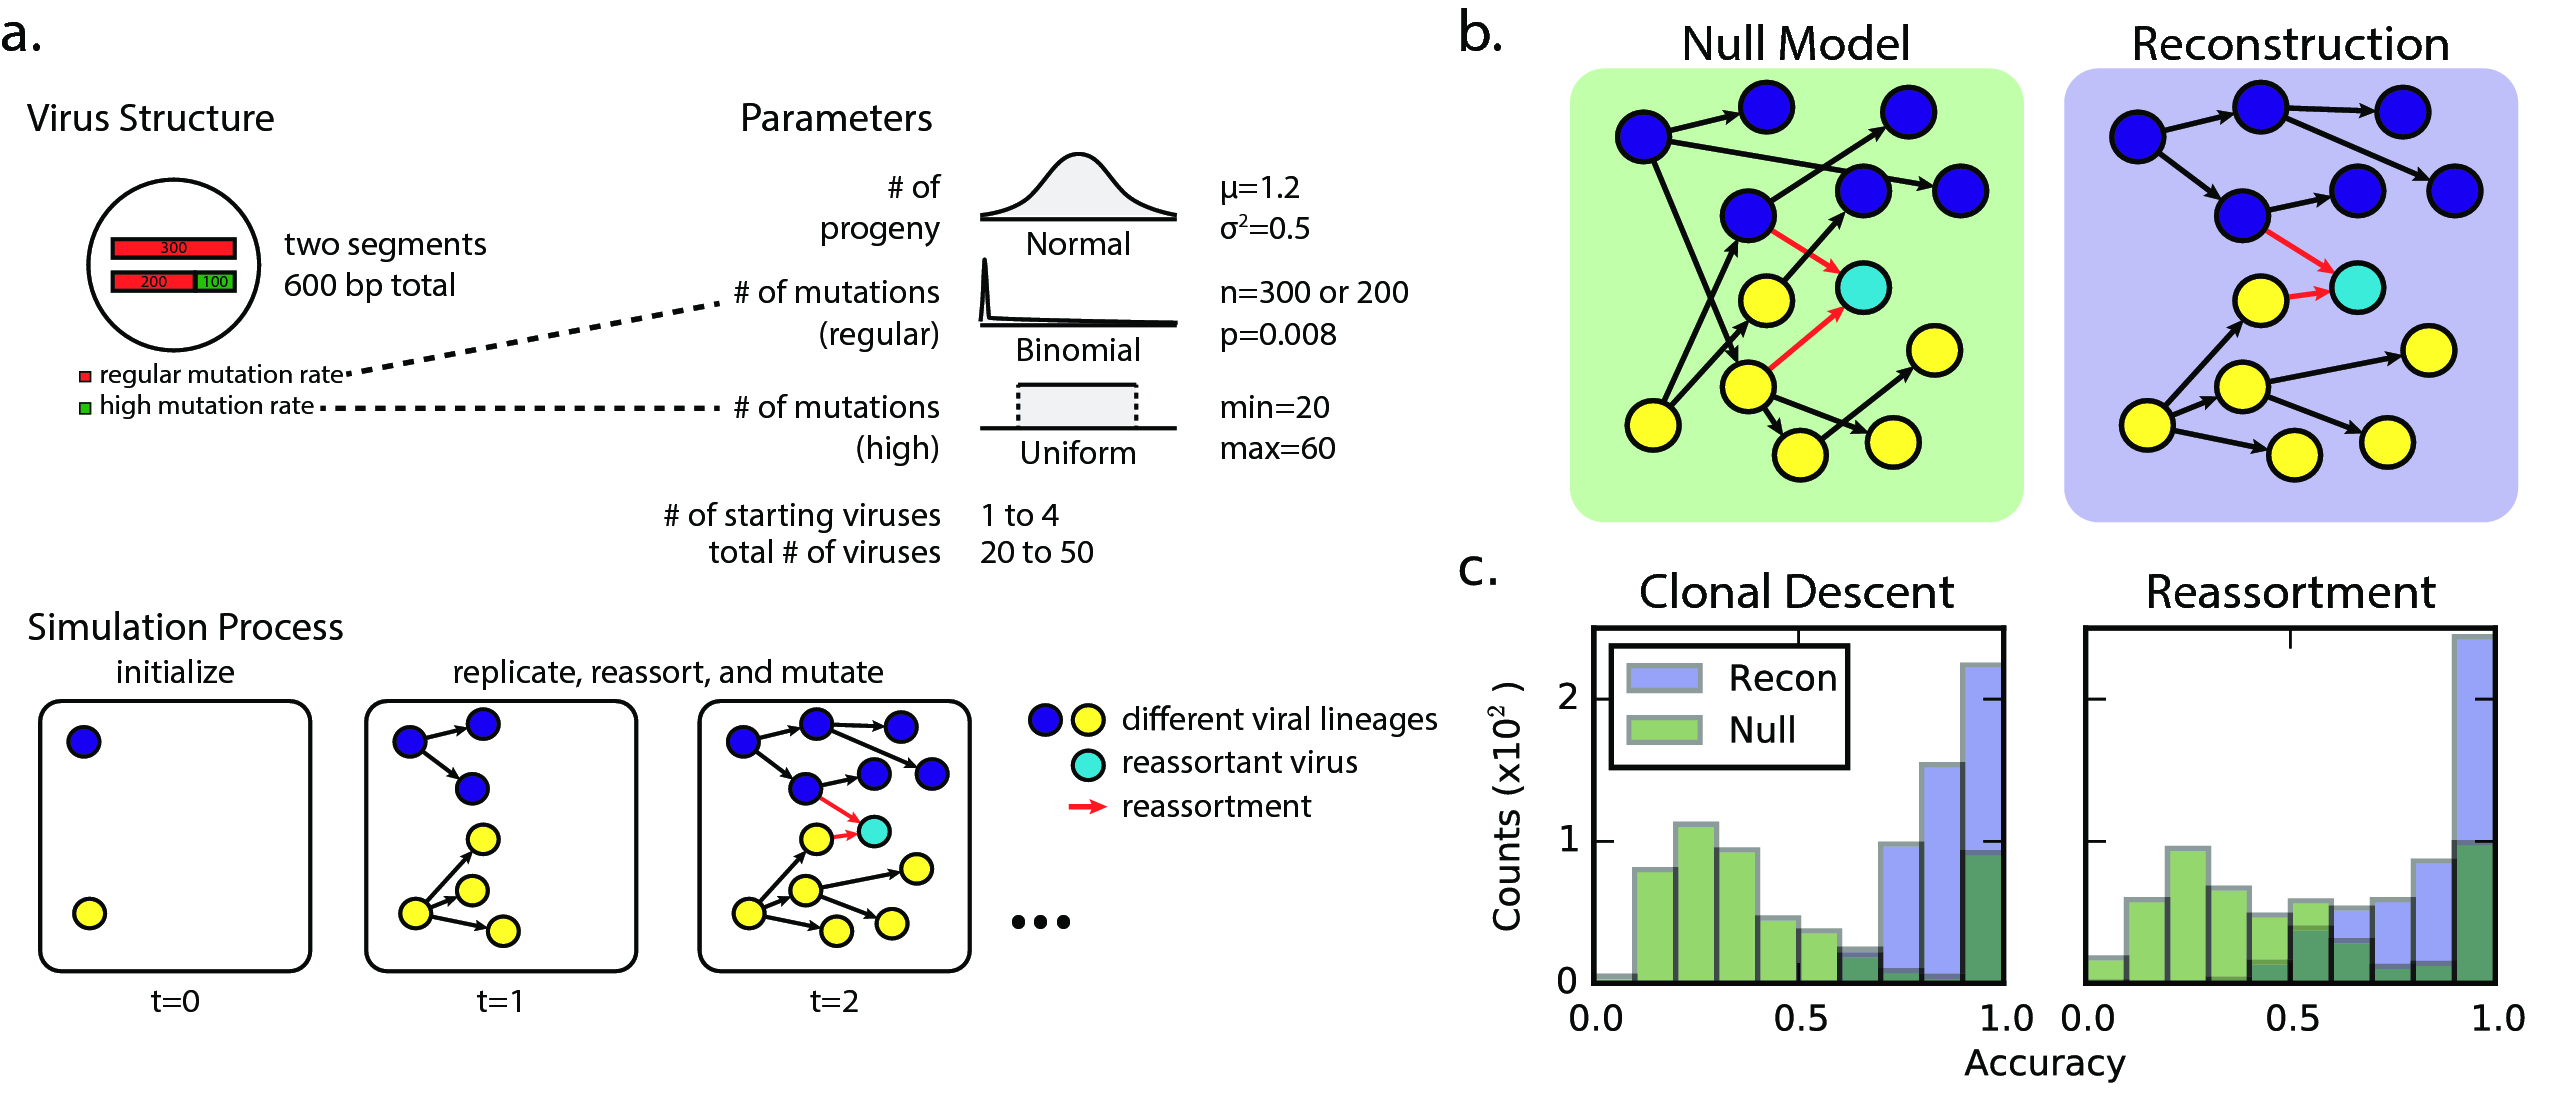 Figure 11: Viral simulation results. (a) Schematic of simulation studies conducted on a model two-segment virus with one segment capable of hypermutating in a short region of it. (b) In the null model, genomic information is ignored and a source virus is picked at random from isolates prior to it in time. Reassortants remain identified as reassortants, but sources are changed. In the proper reconstruction, sources are chosen to minimize genetic distance across two segments. (c) Distribution of proportion of reassortant viruses accurately identified under a proper reconstruction (blue bars) as opposed to a null model (green bars).